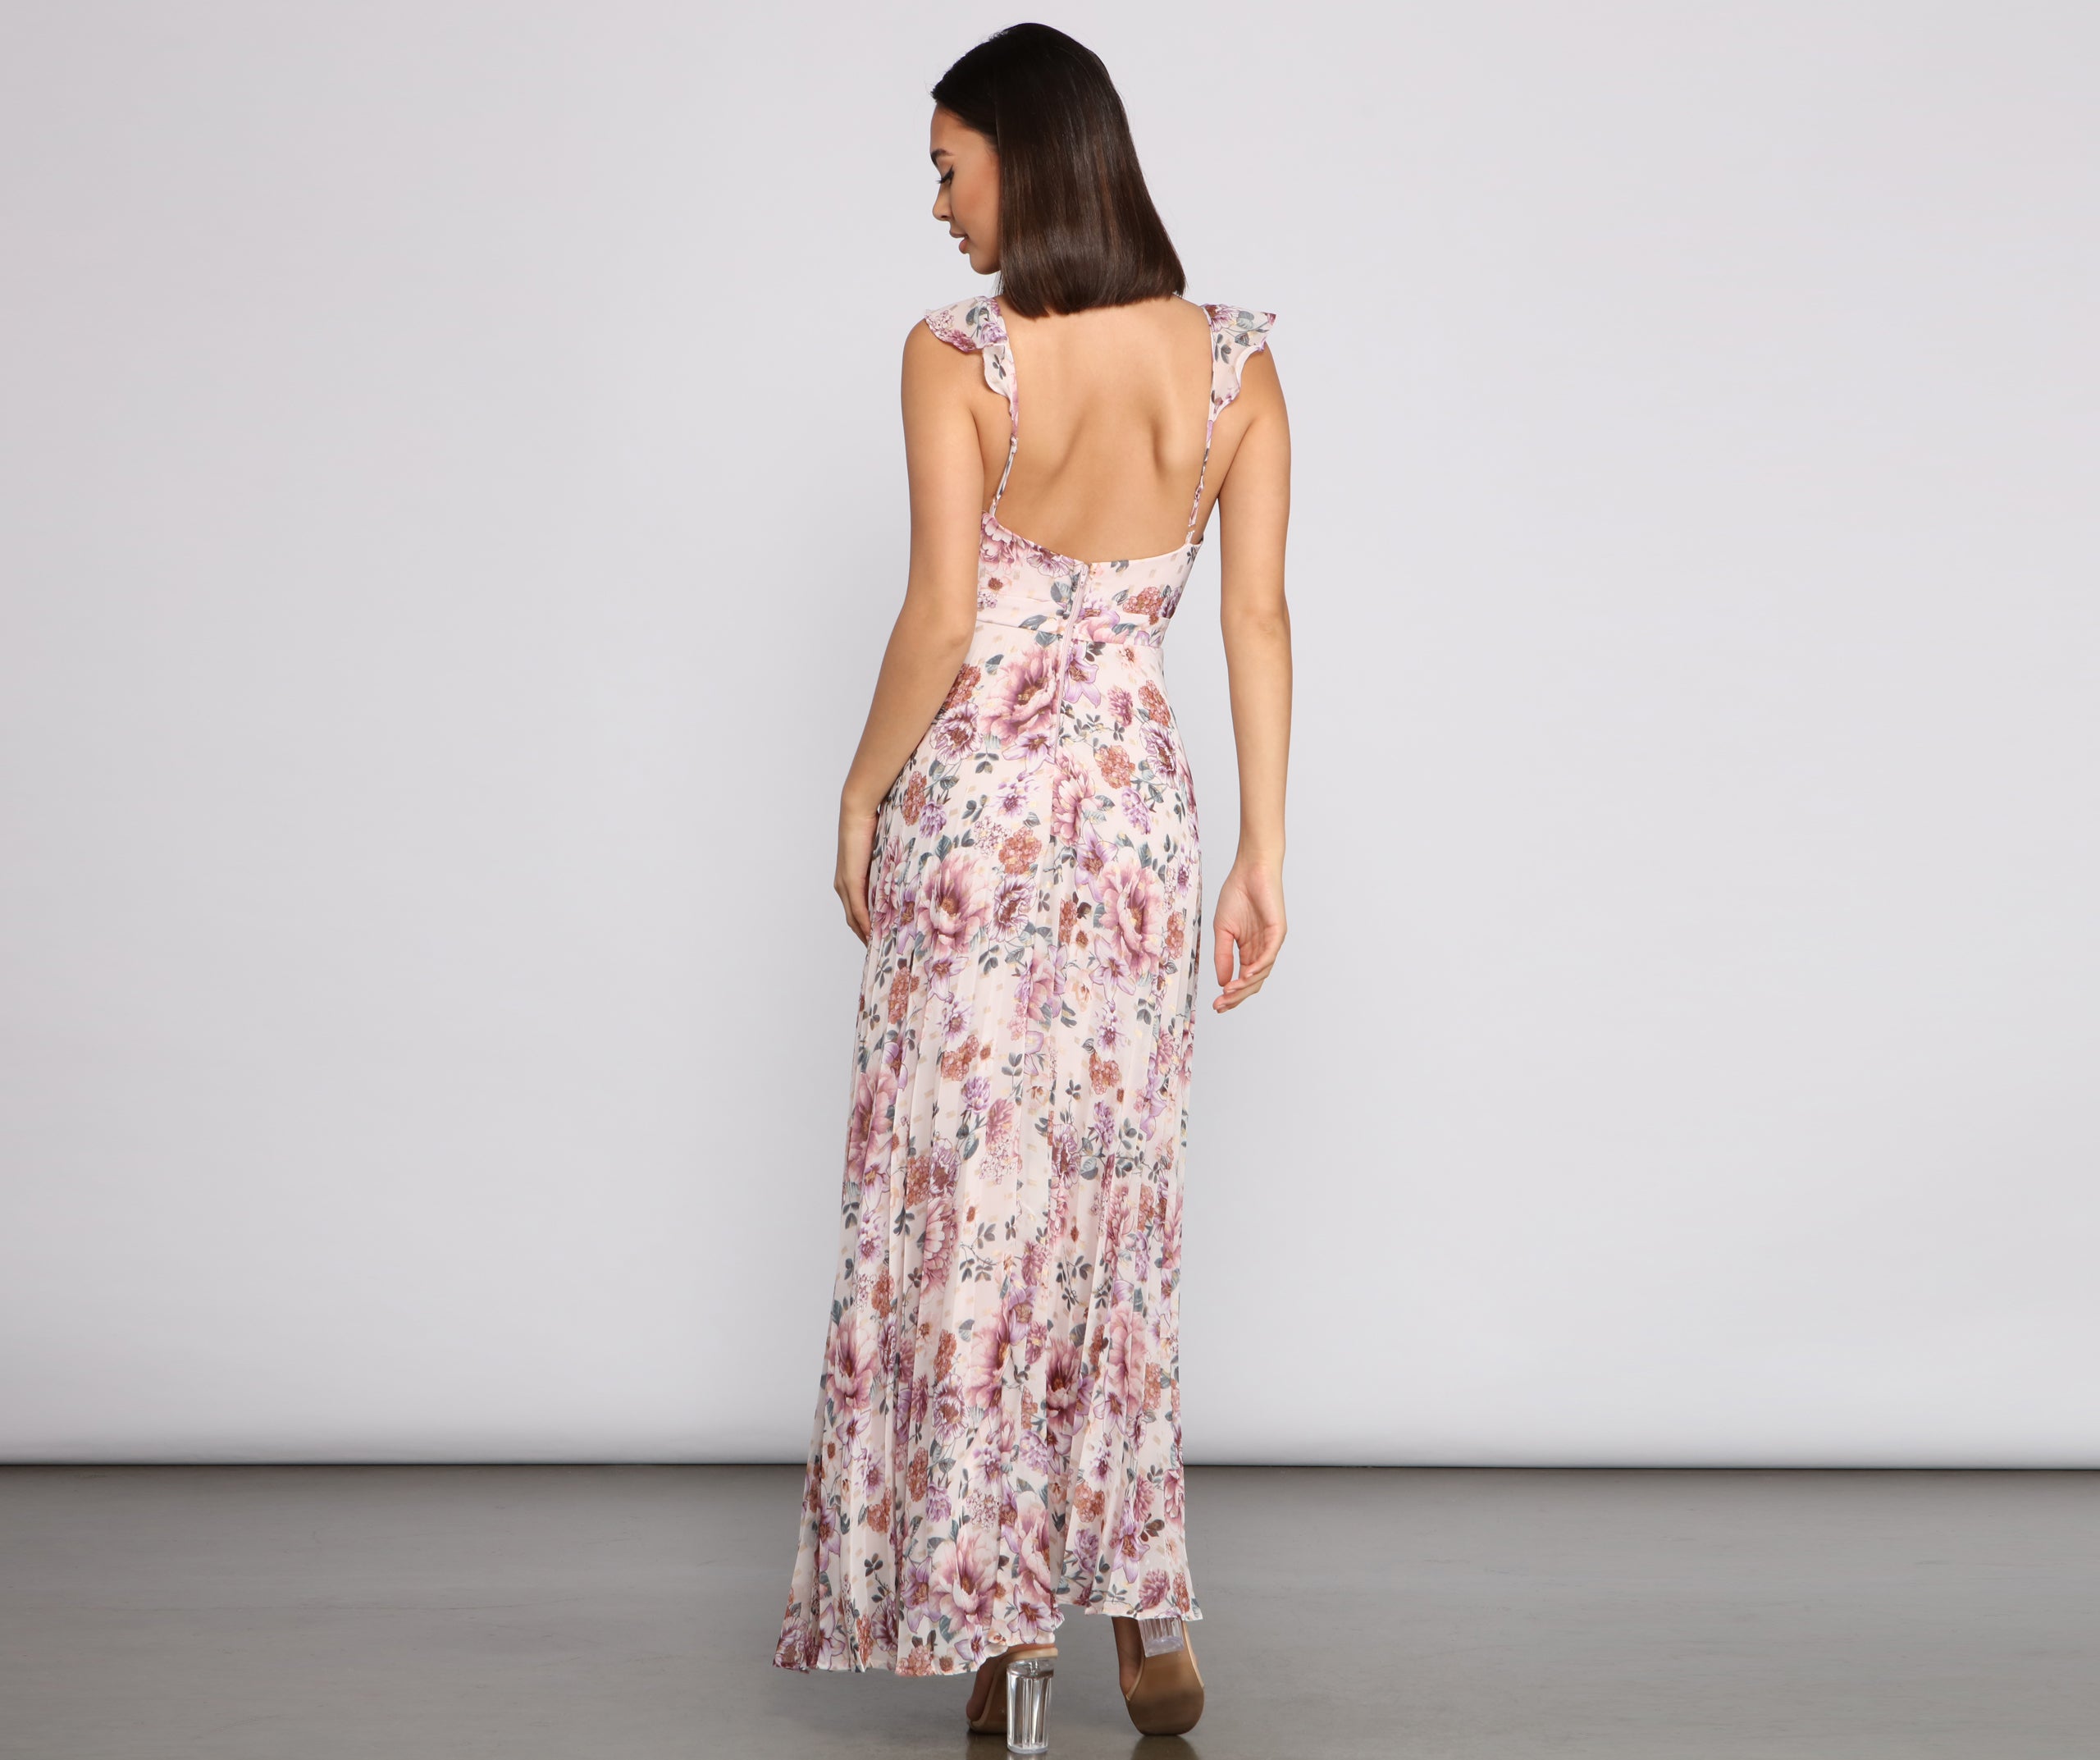 Ava Formal Floral Pleated Dress